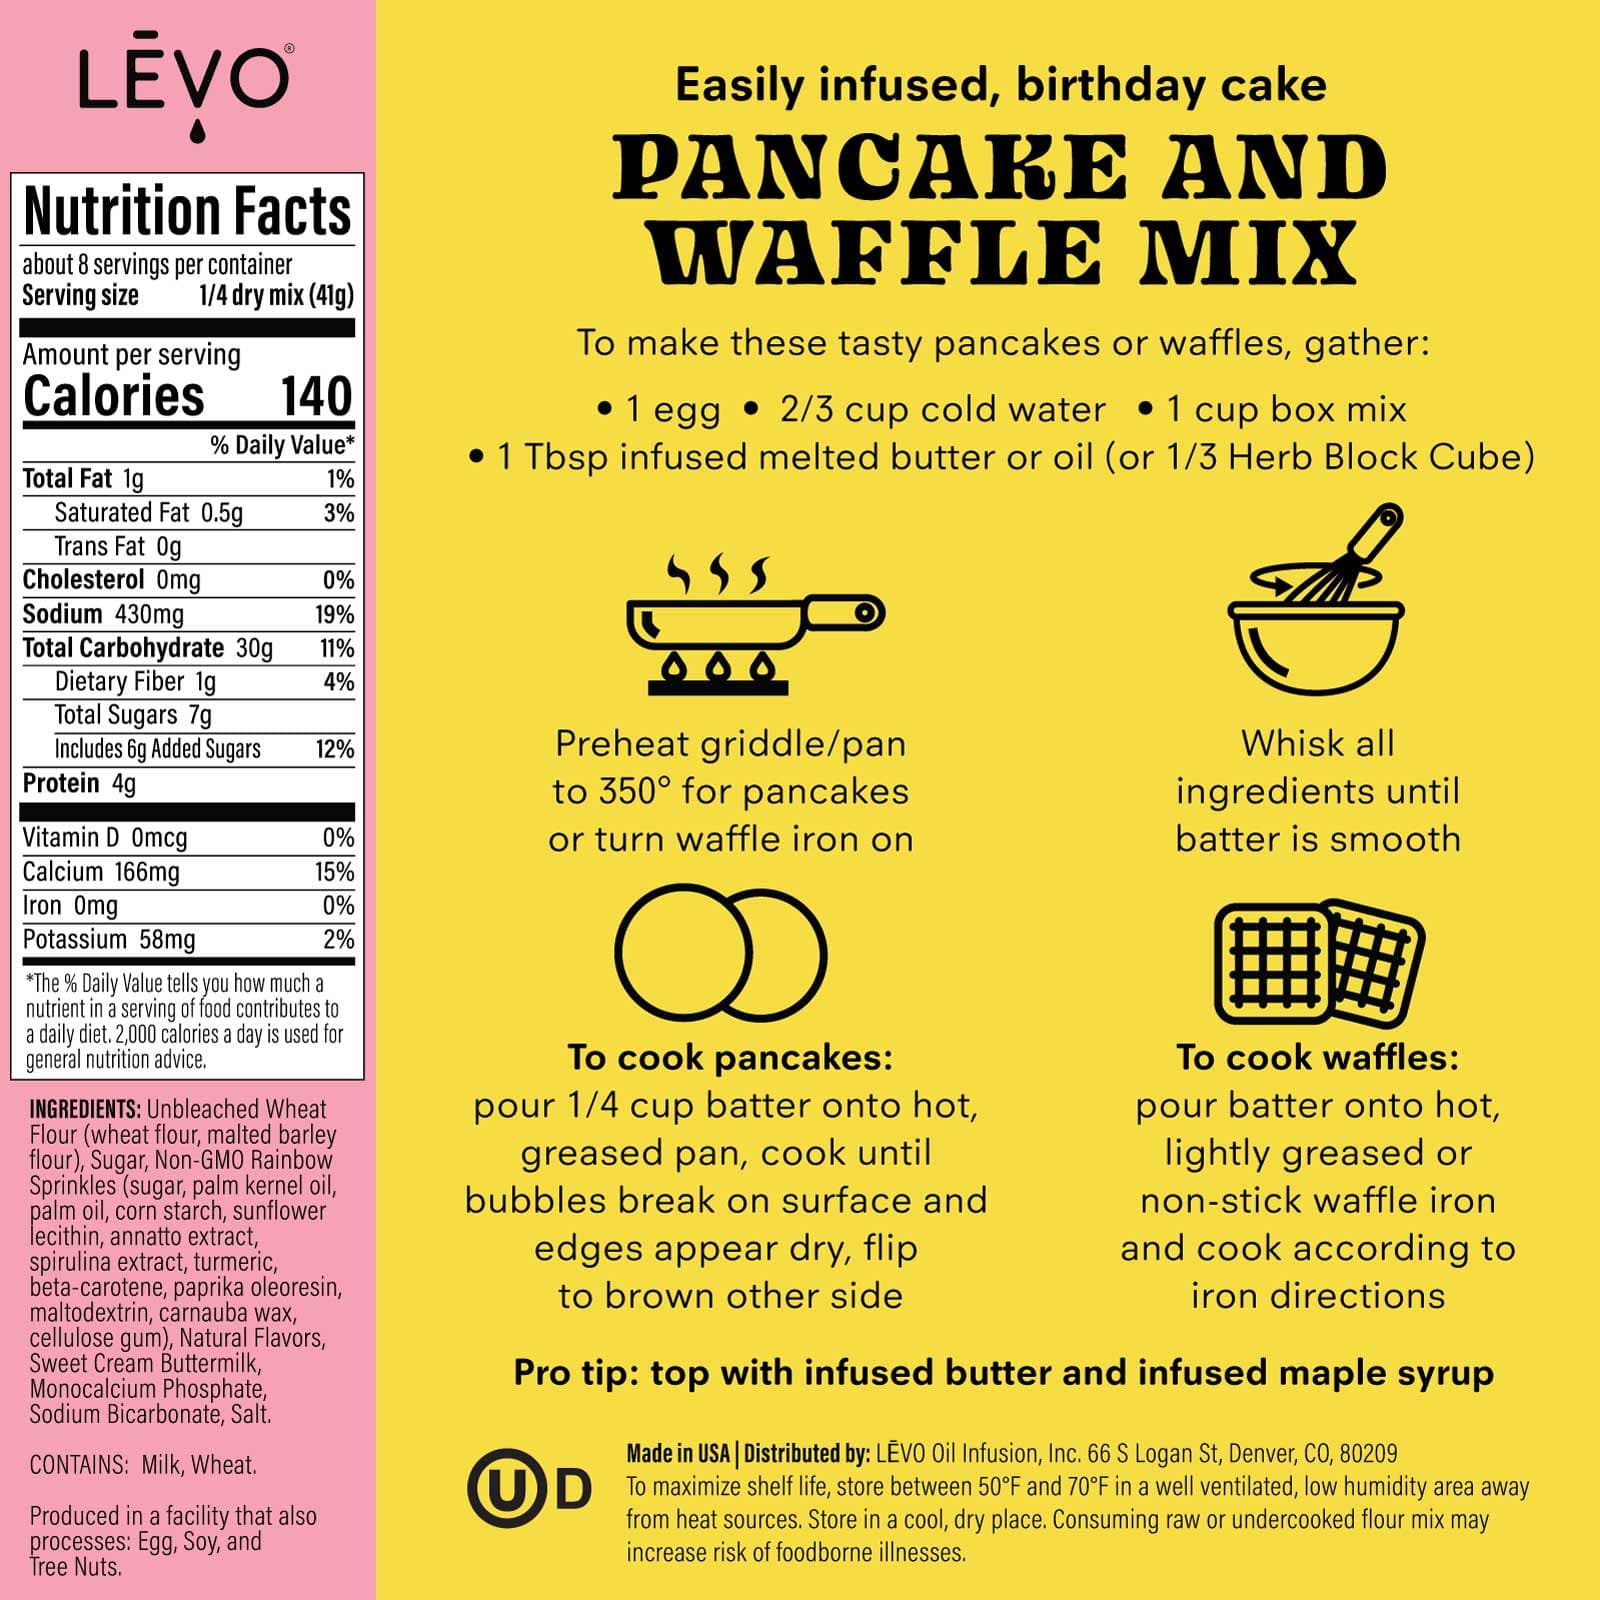 Easily infused LEVO birthday cake pancake and waffle mix. Just add one egg, cold water, and melted butter to have your own infused breakfast party.